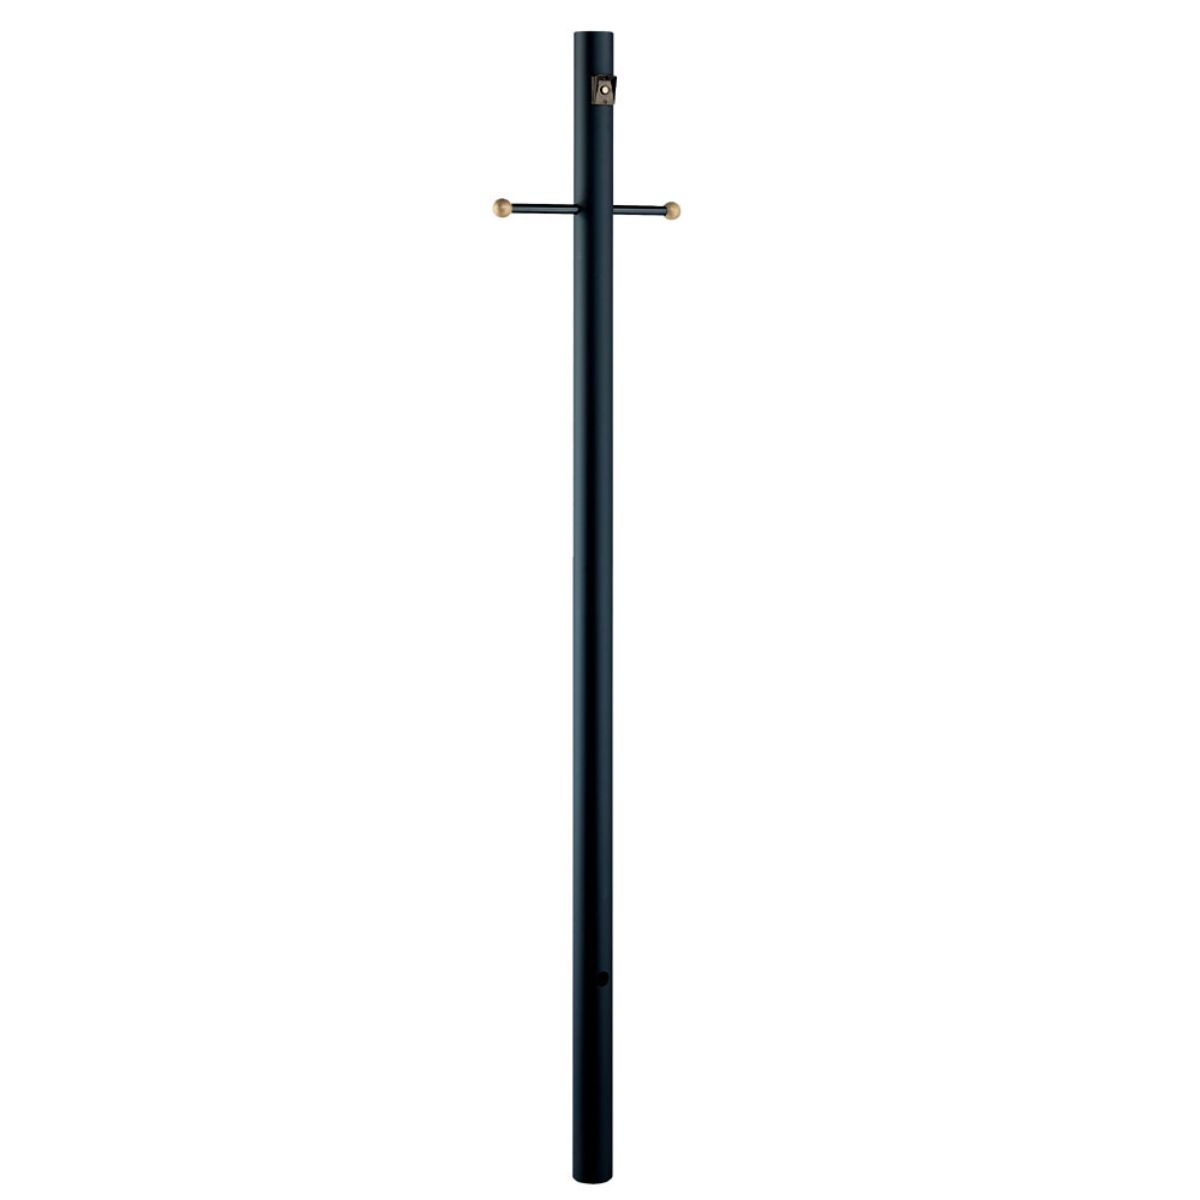 7 Ft Round Aluminum Direct Burial Pole with Photocell and Ladder Rest3 In. Shaft Matte Black Finish